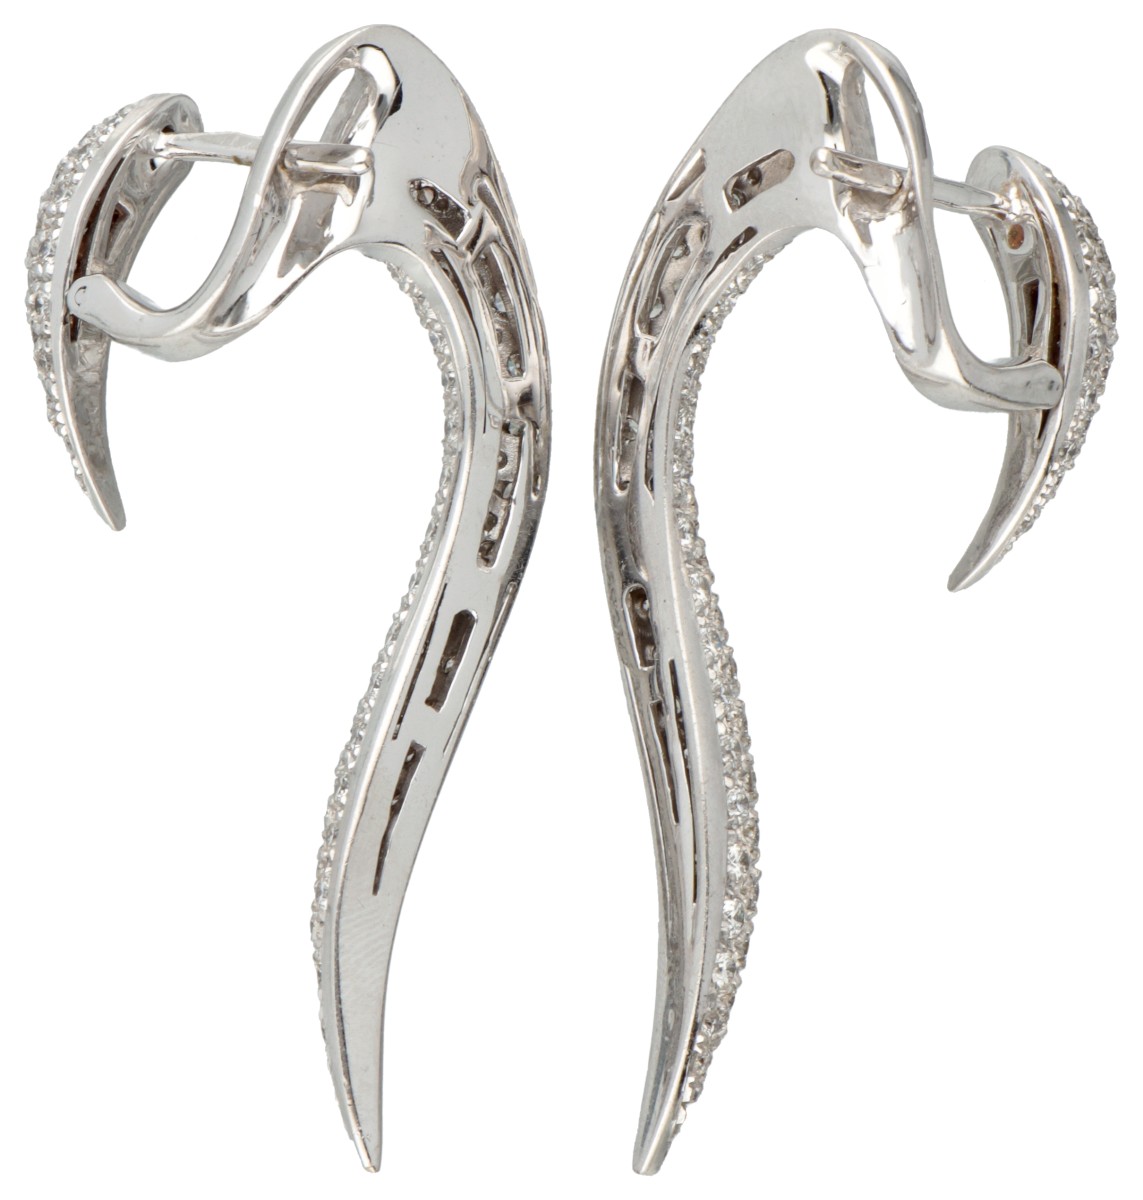 18K. White gold ear jacket earrings set with approx. 2.40 ct. diamonds. - Image 3 of 3